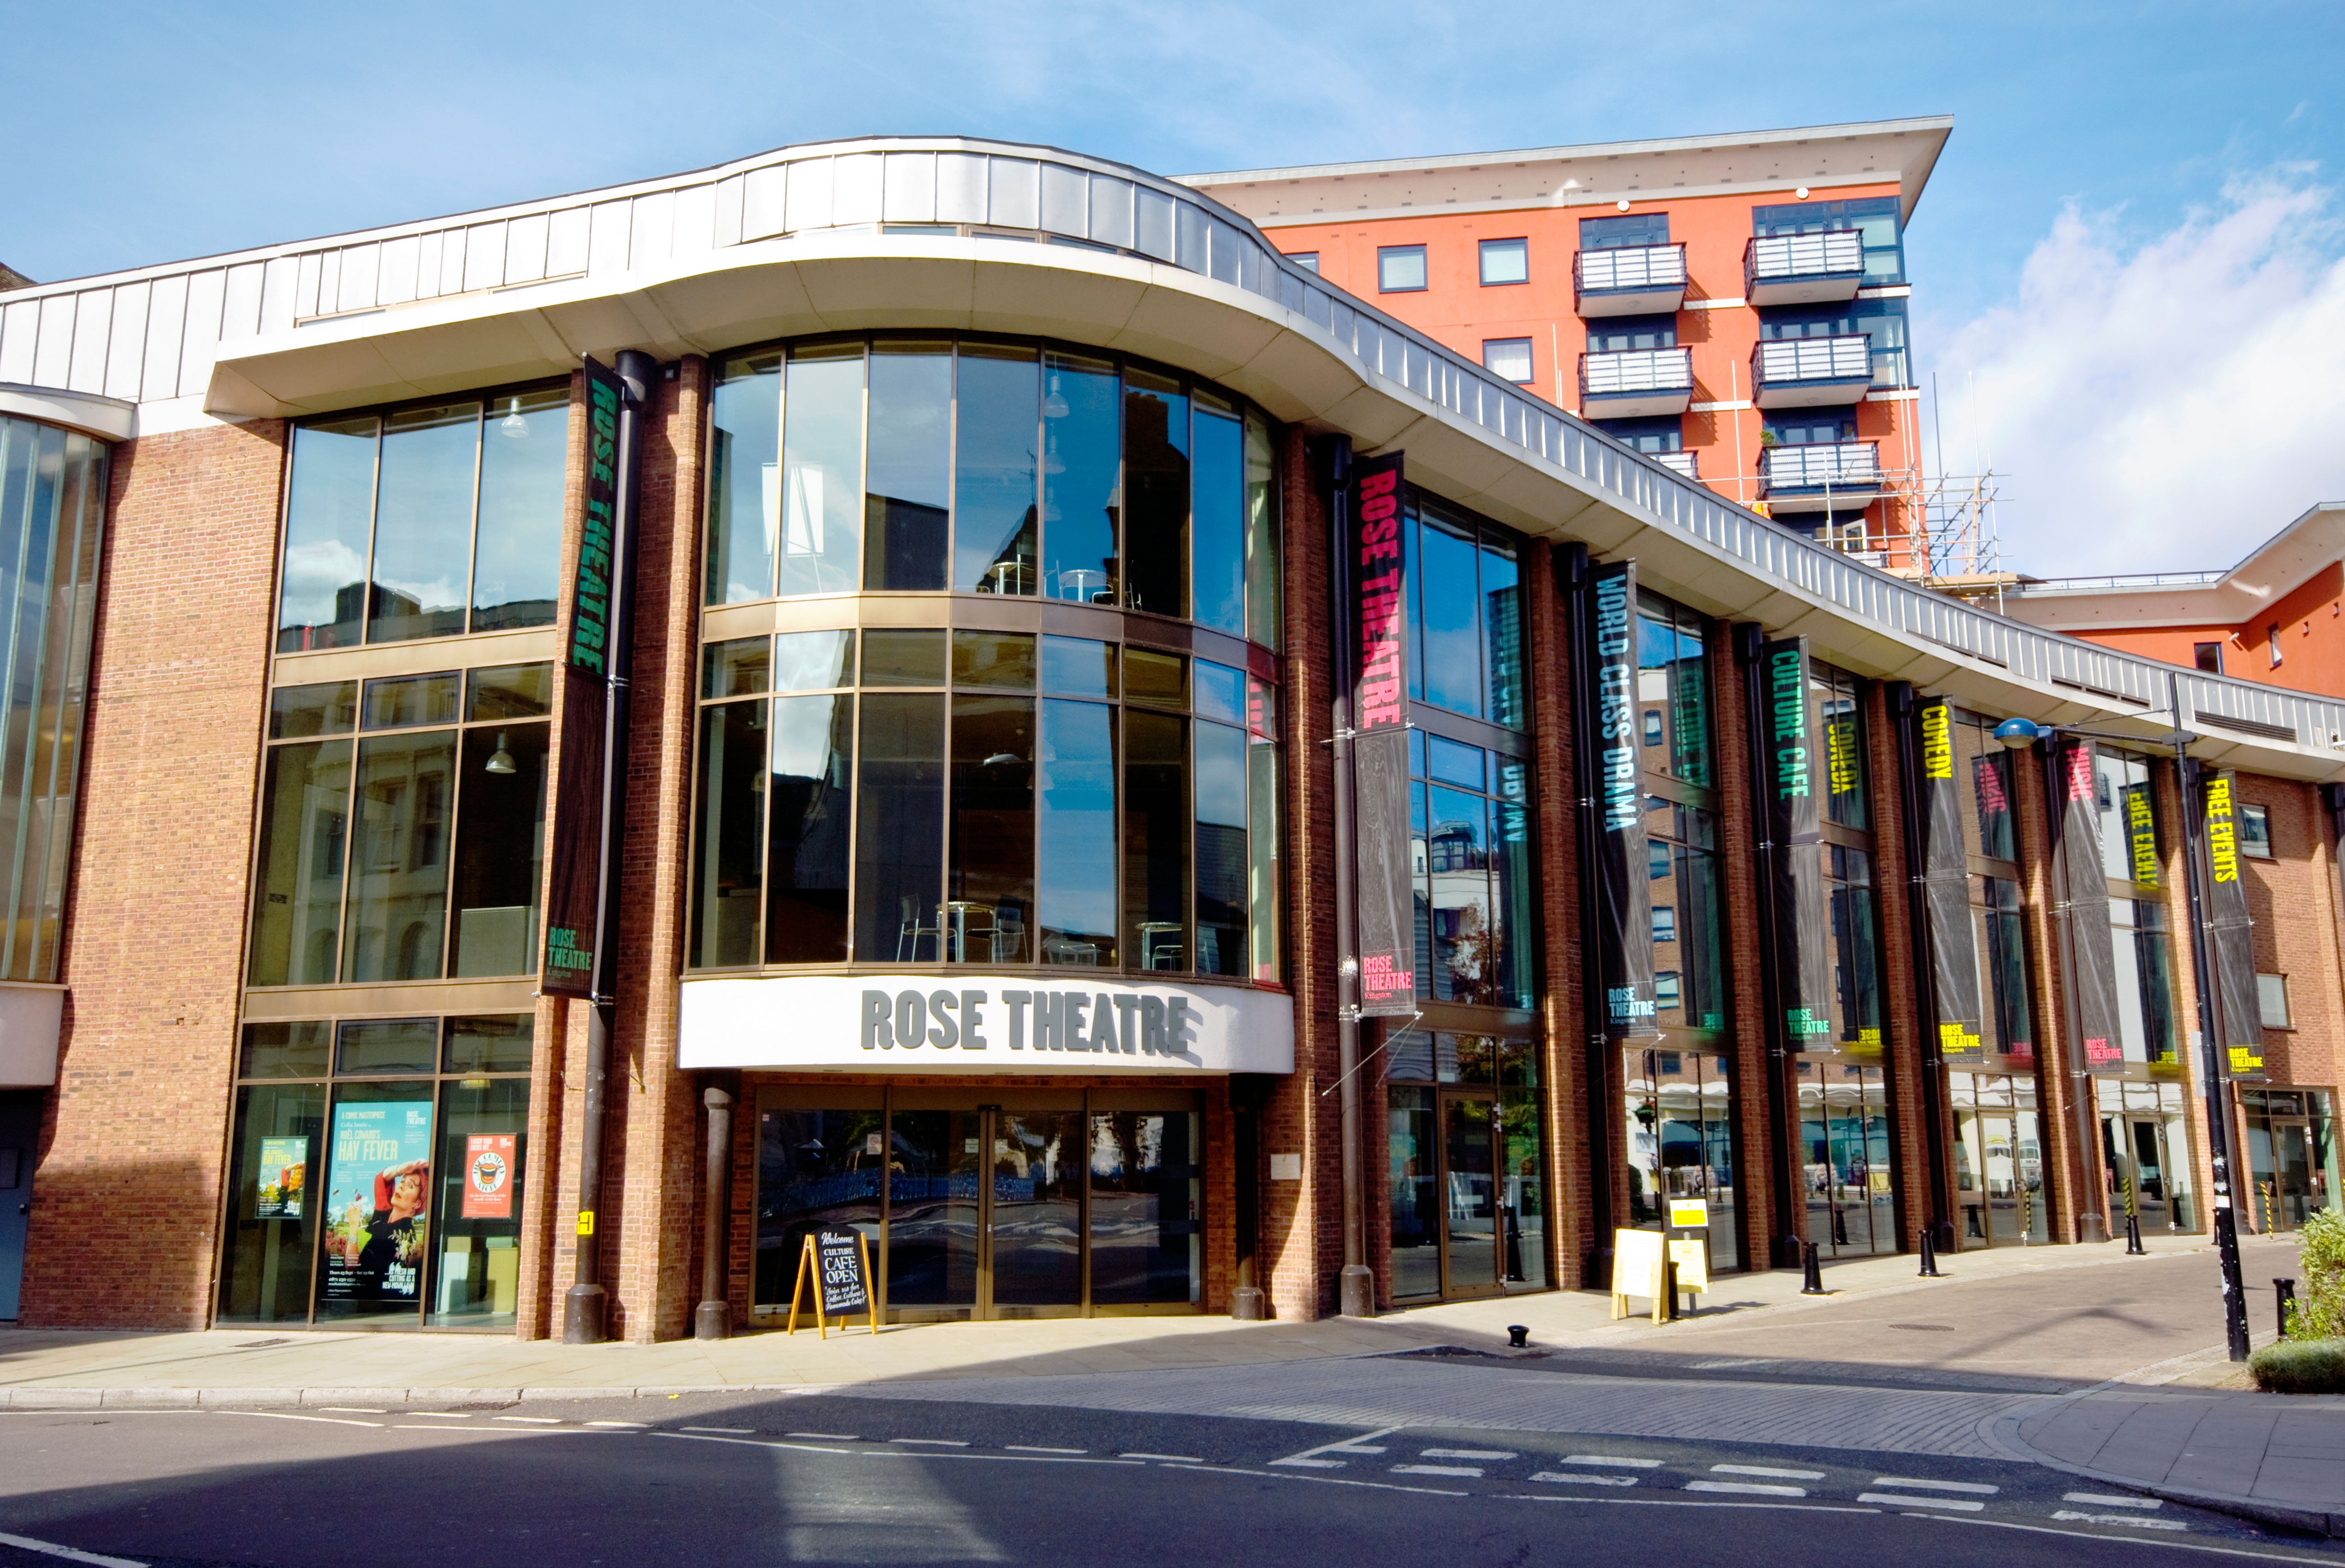 A live performance at the Rose Theatre in Kingston was disrupted on Tuesday night after a member of the audience refused to put on a mask.